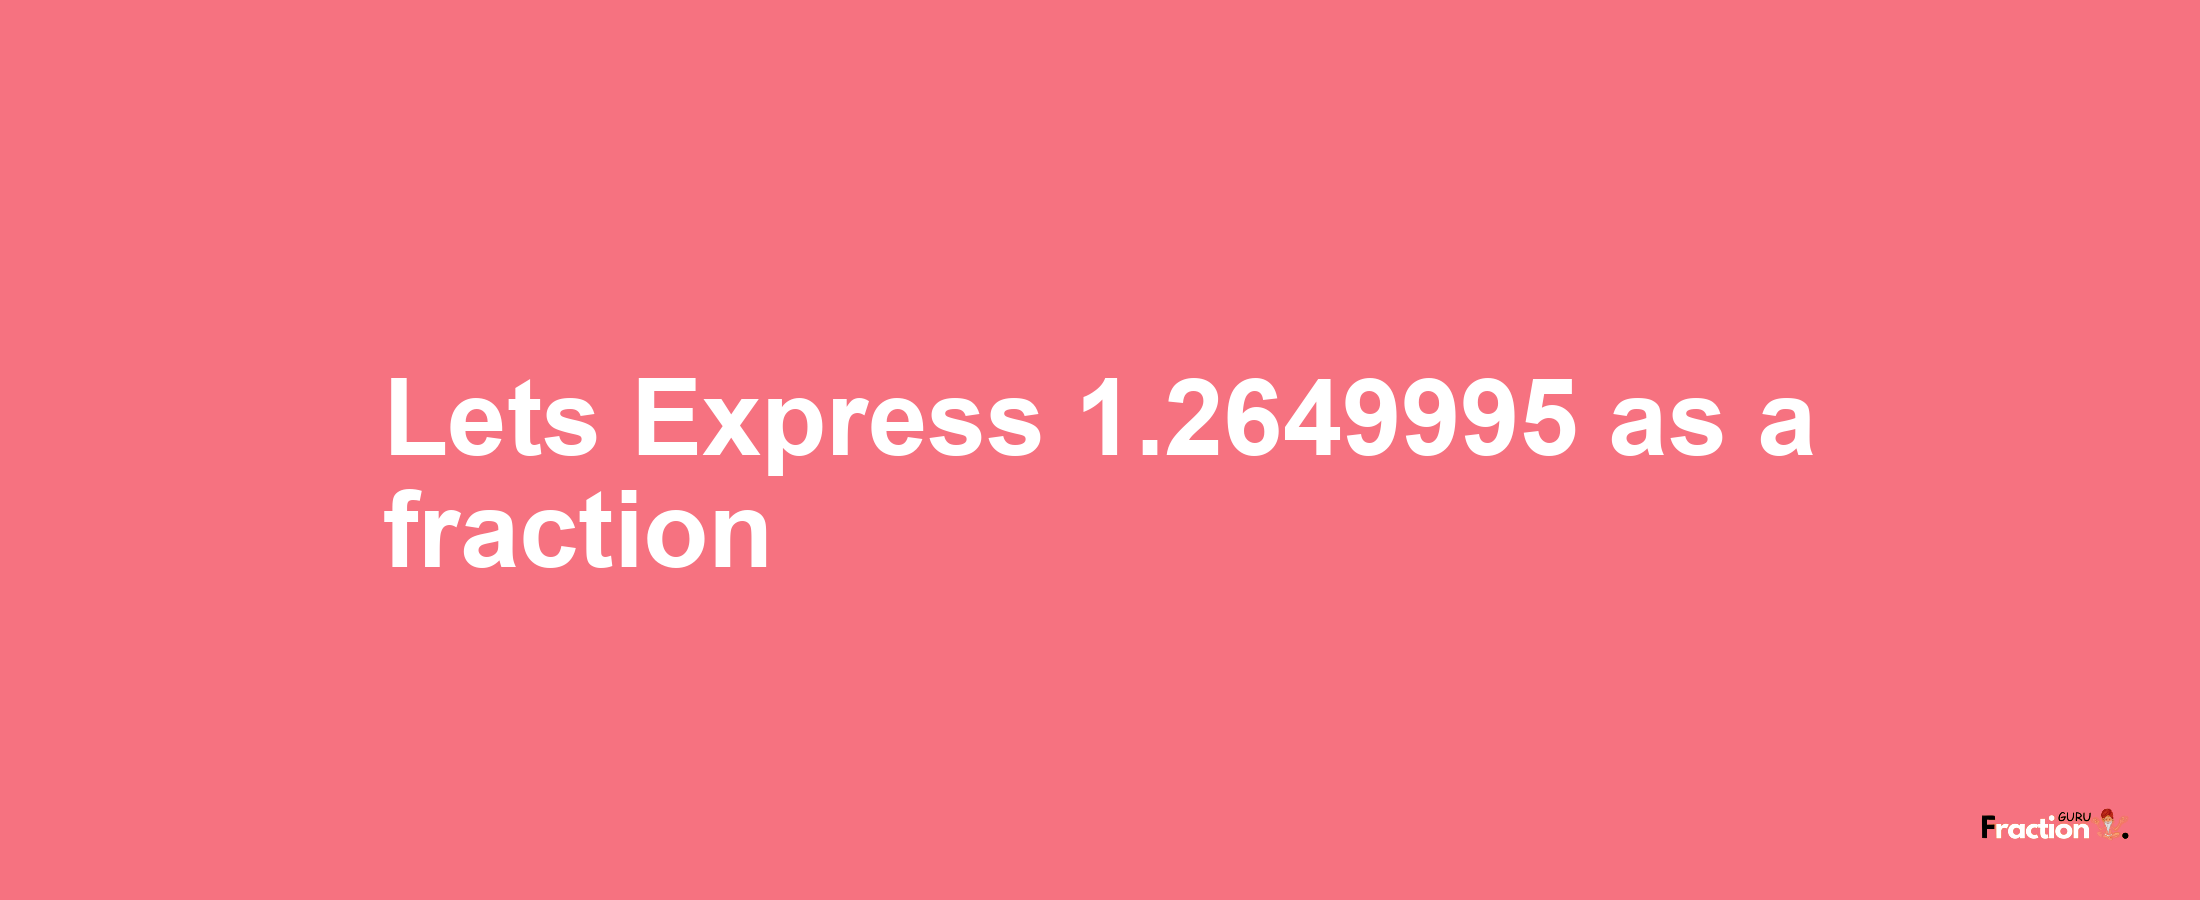 Lets Express 1.2649995 as afraction